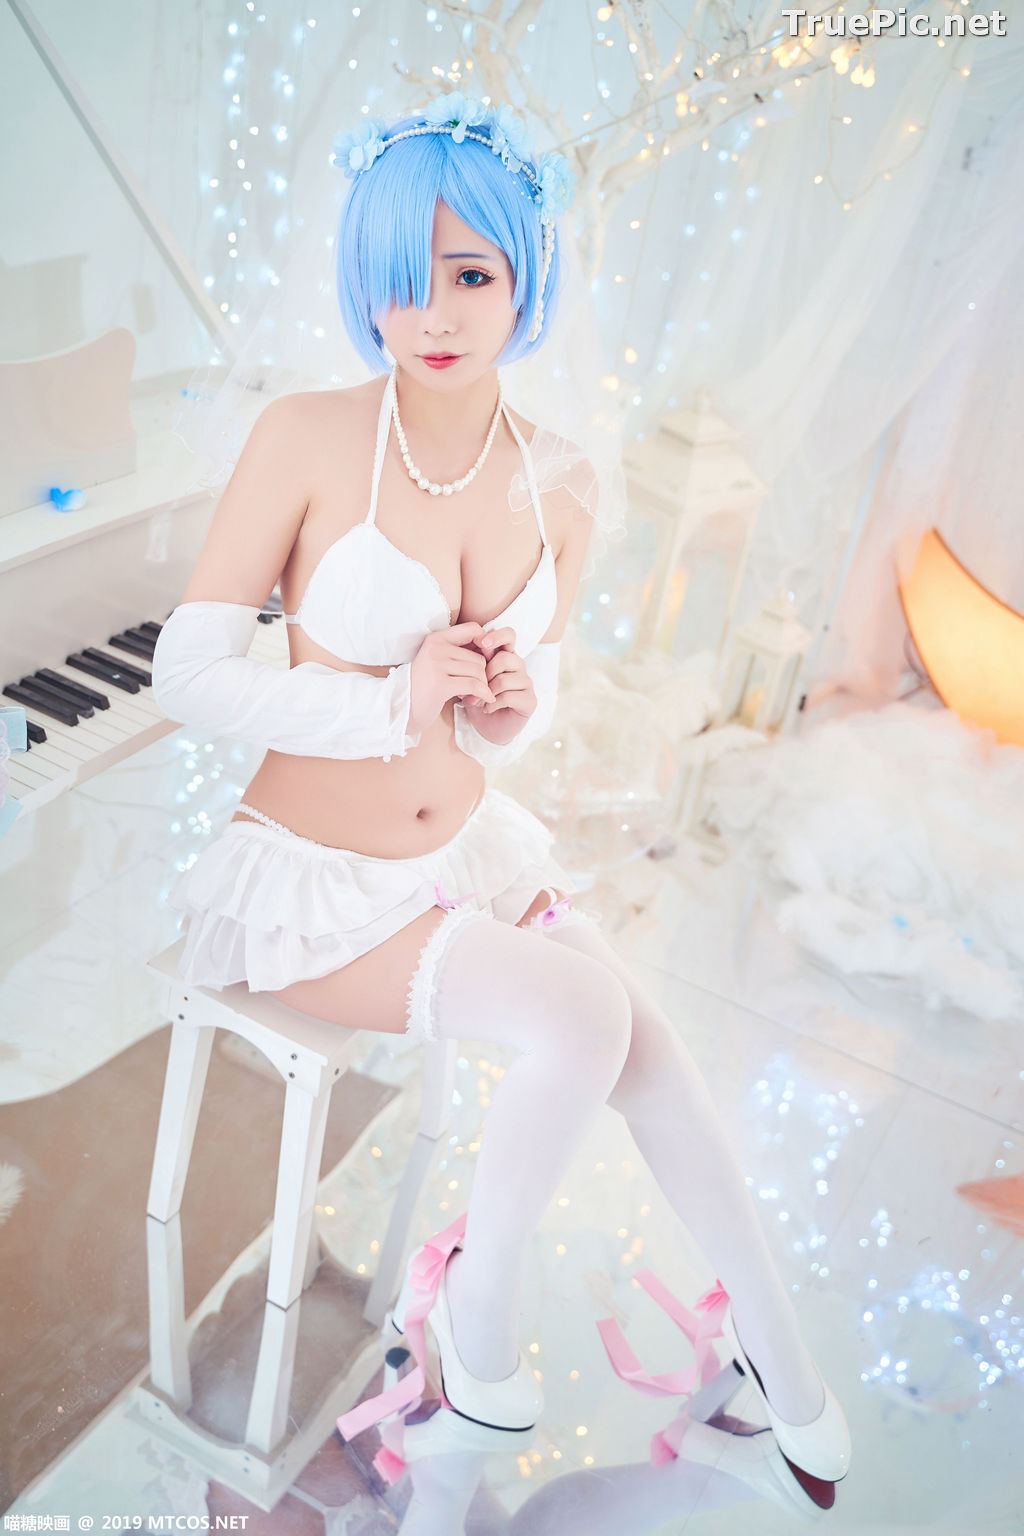 Image [MTCos] 喵糖映画 Vol.043 – Chinese Cute Model – Sexy Rem Cosplay - TruePic.net - Picture-22